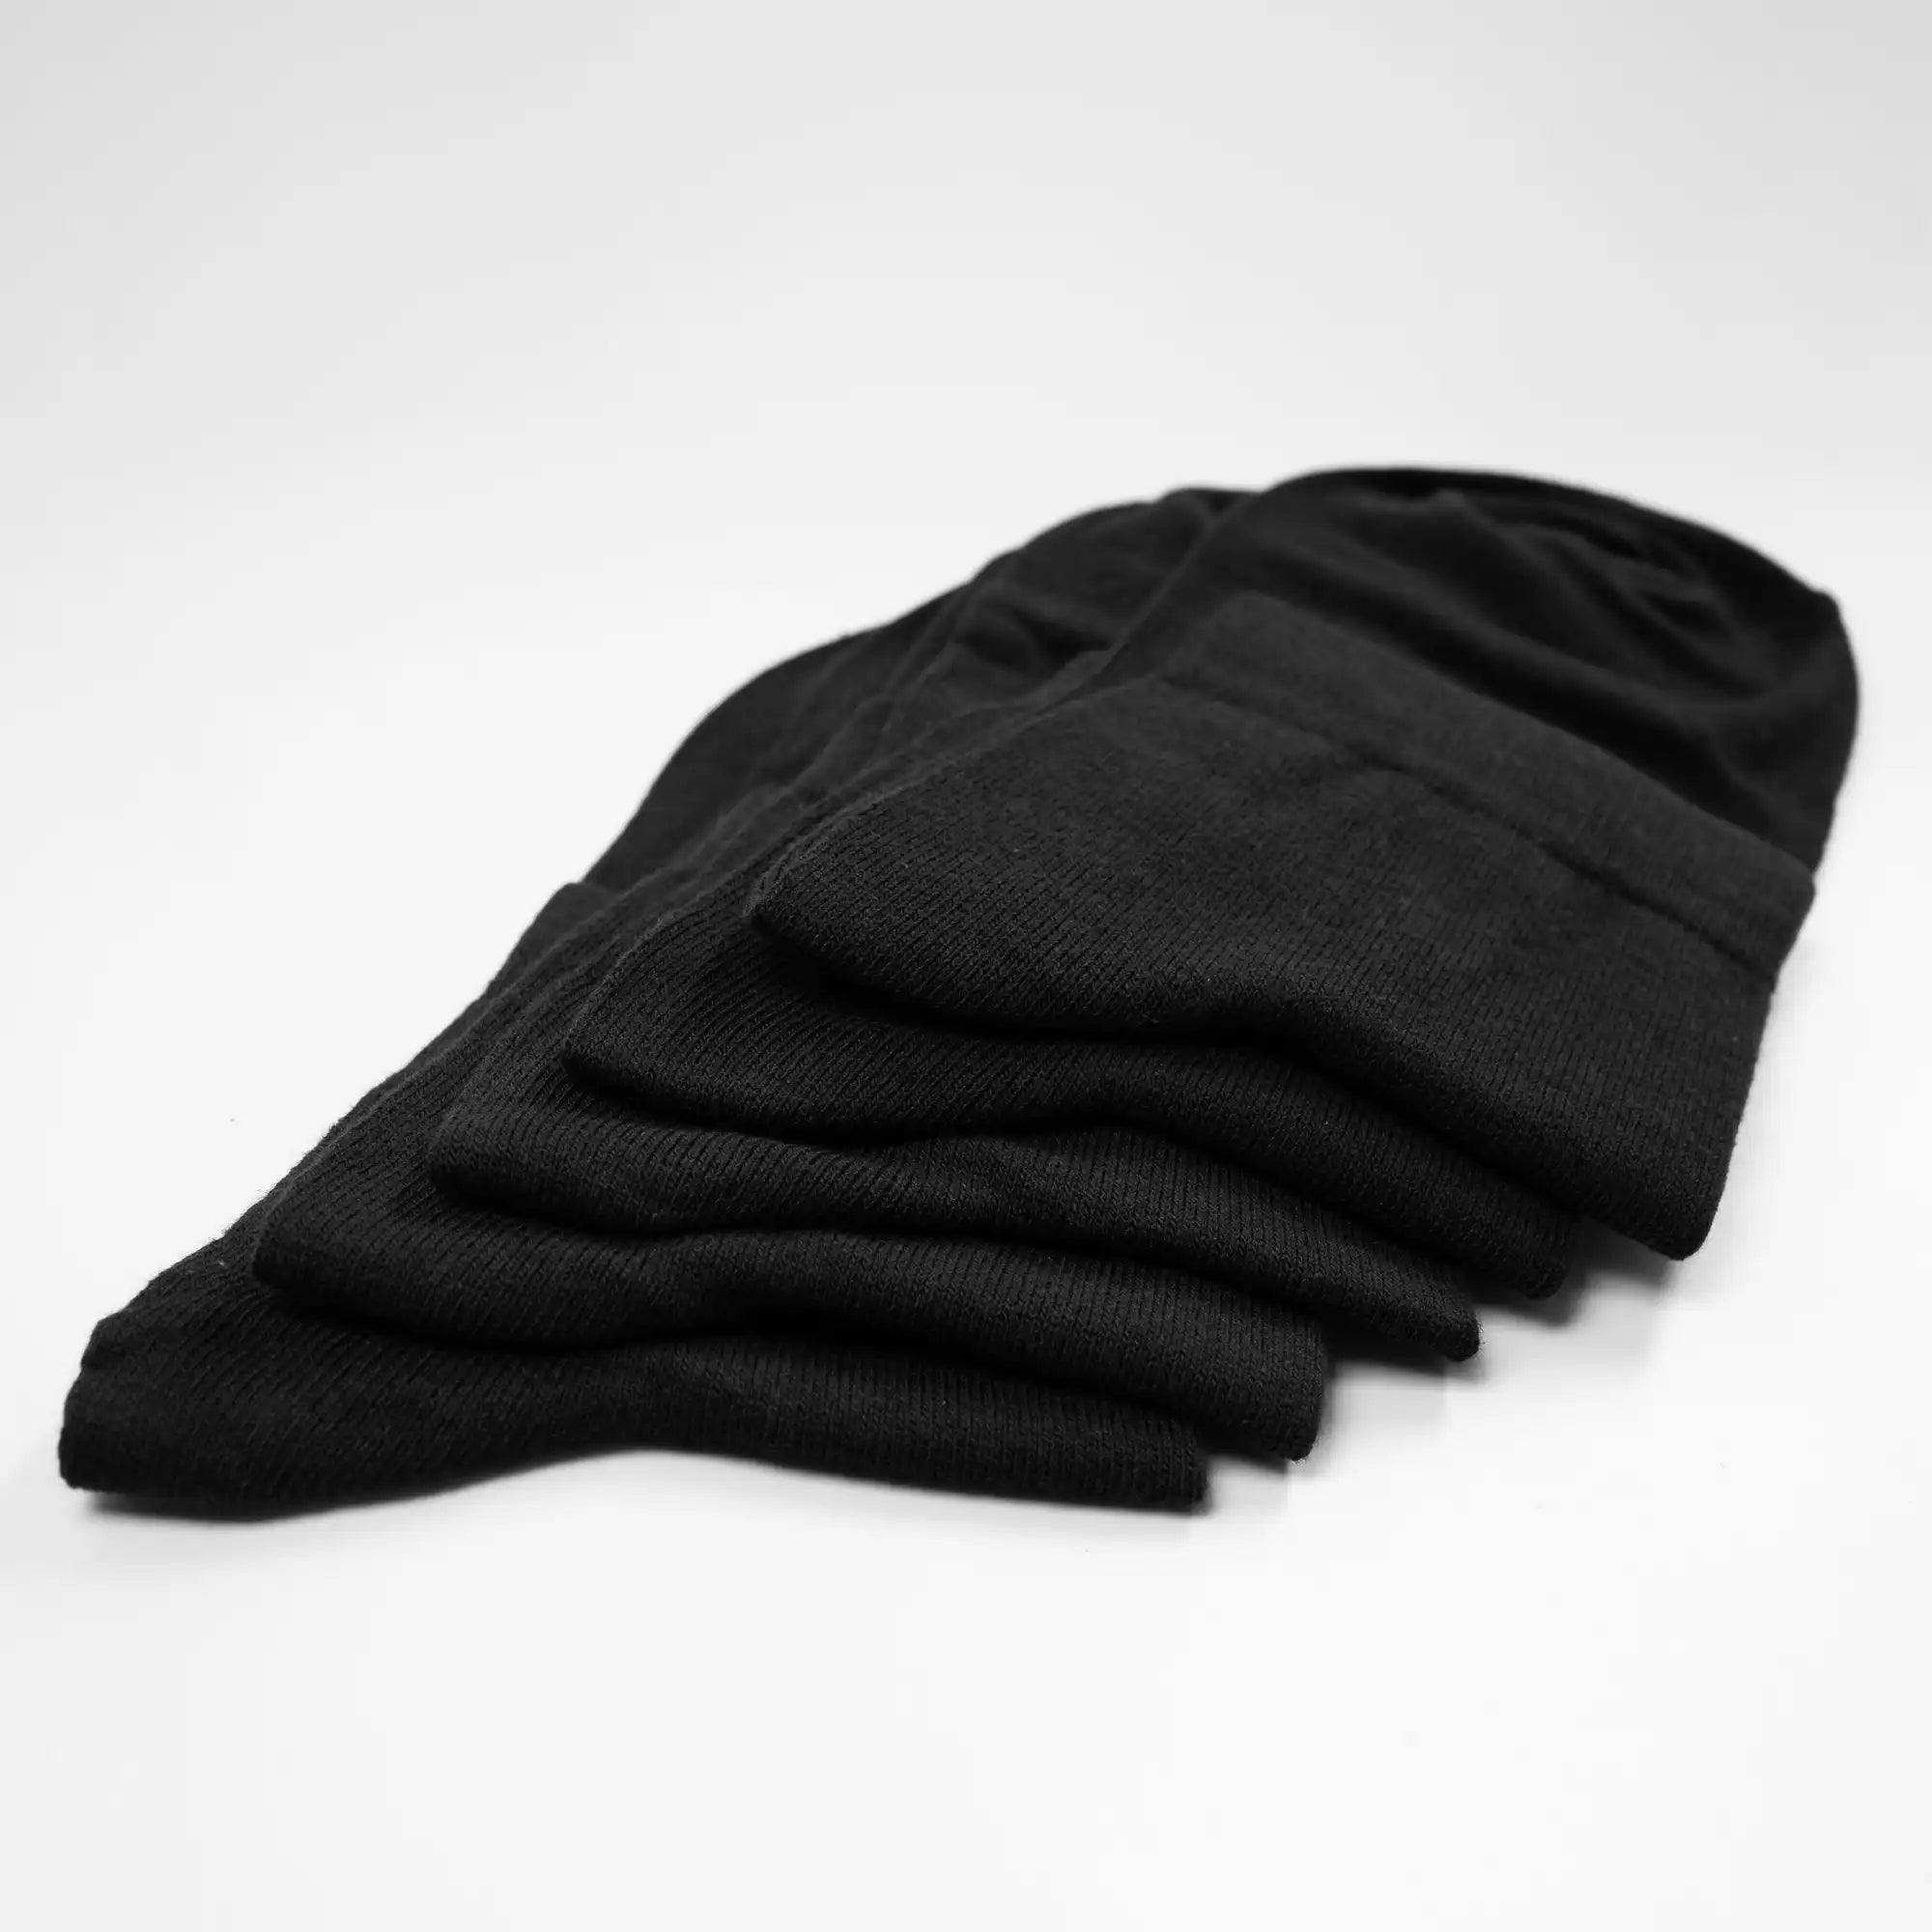 Young Wings Men's Black Colour Cotton Fabric Solid Ankle Length Socks - Pack of 5, Style no. M1-224